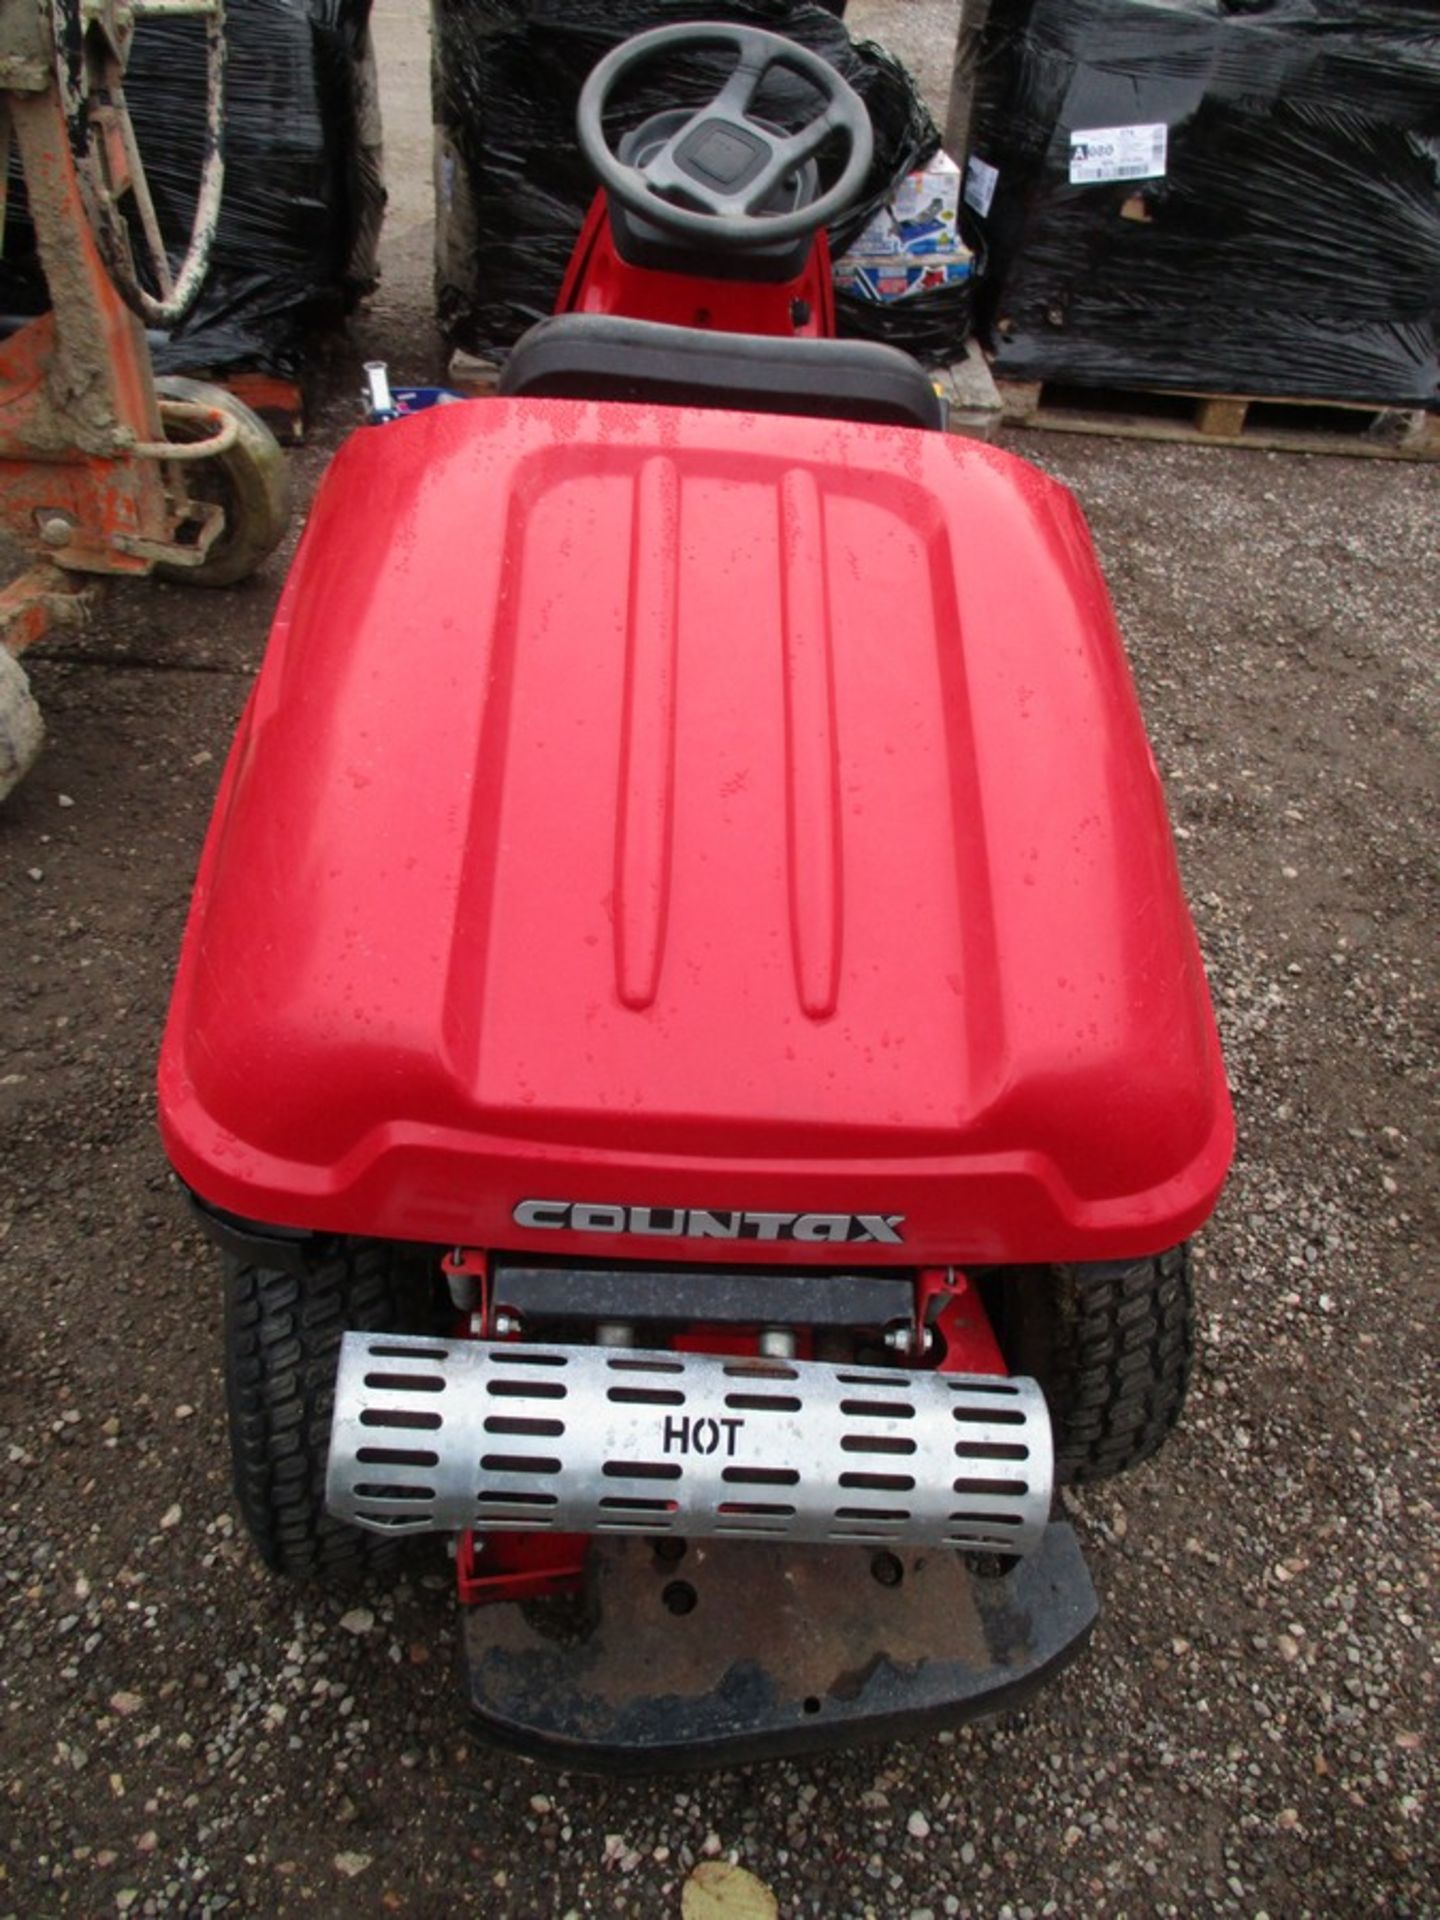 COUNTAX OUTFRONT MOWER - Image 3 of 3